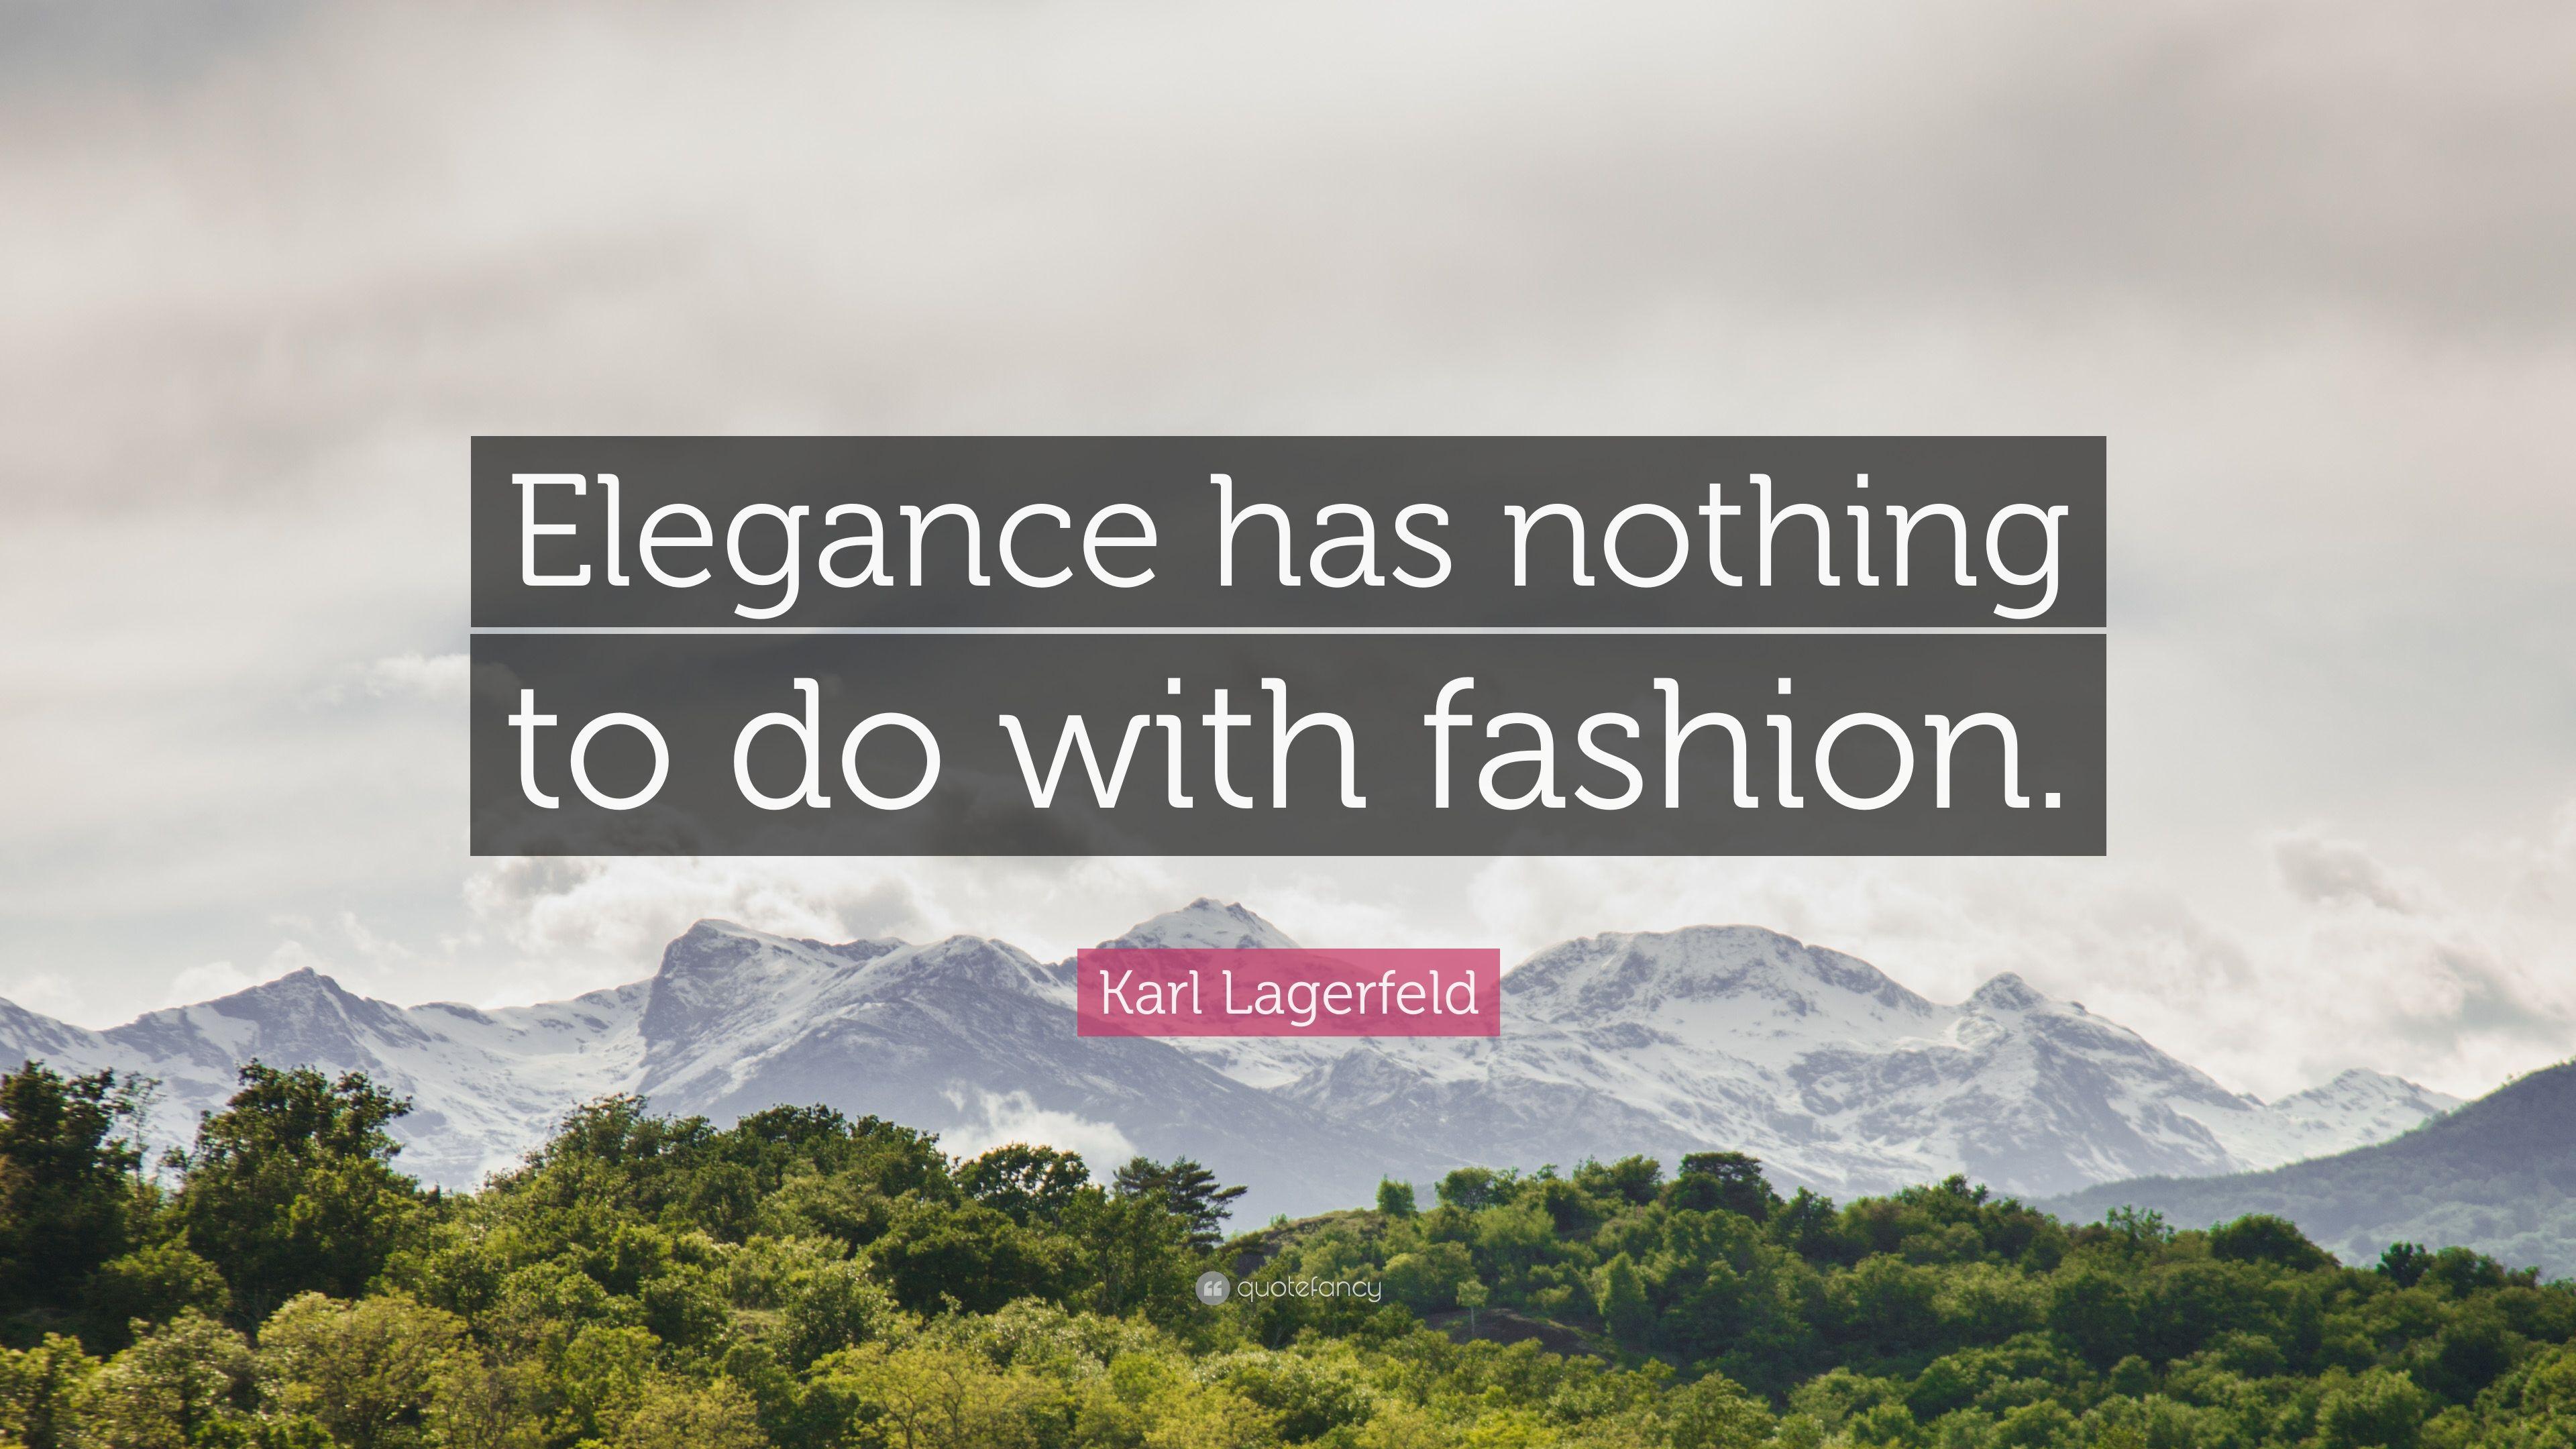 Karl Lagerfeld Quote: “Elegance has nothing to do with fashion.” 7